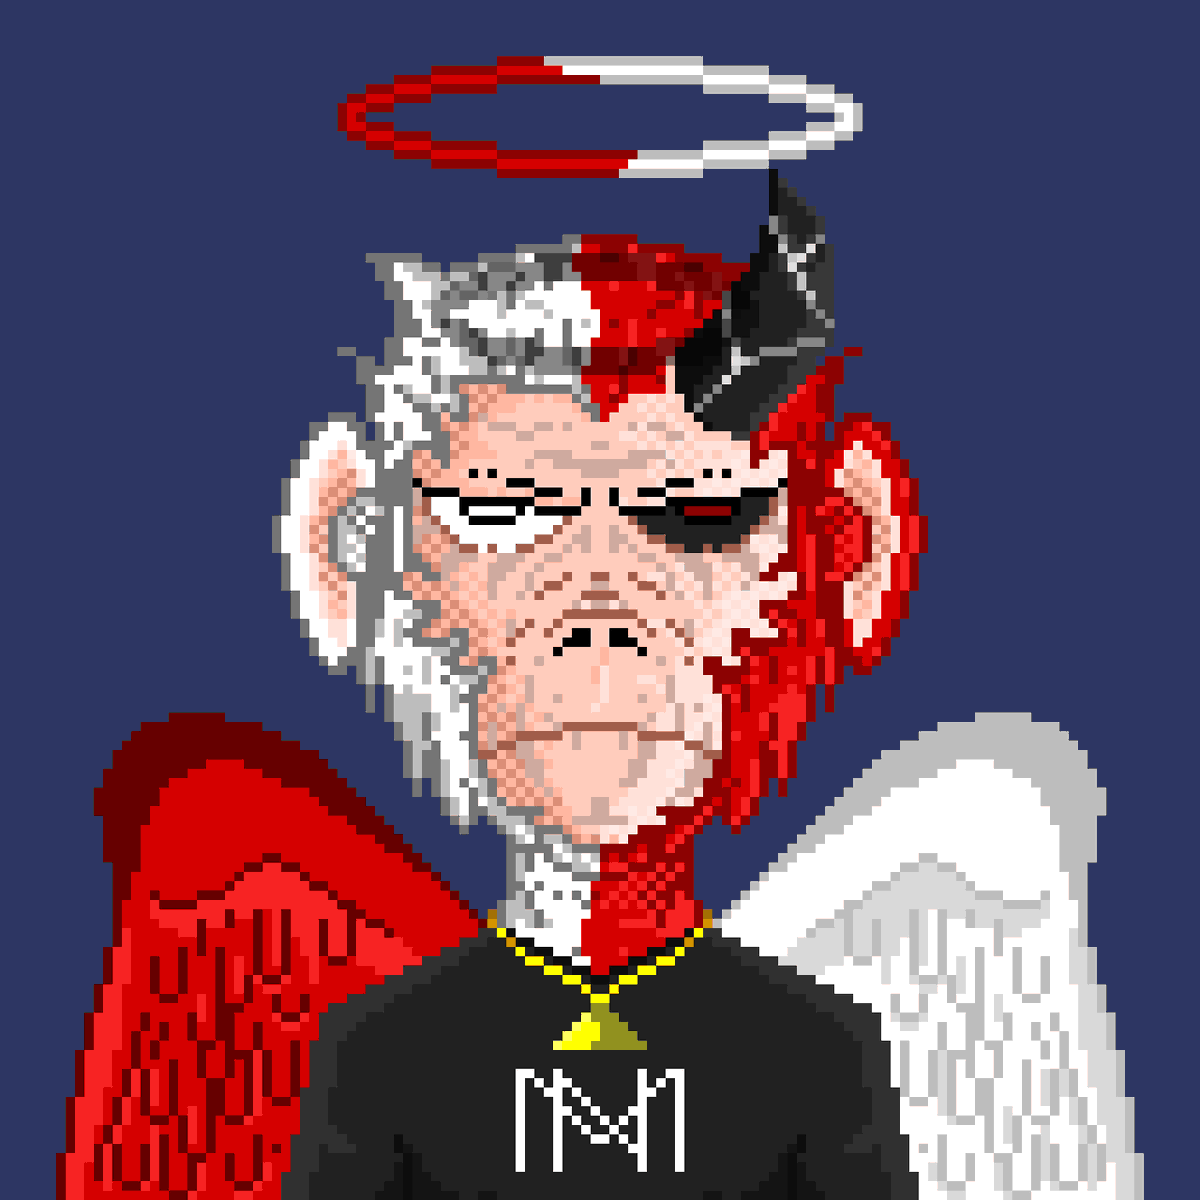 GN GN GN!

#0119 inspired by Demon and Angel

opensea.io/collection/mn-…

#NFTGang #nft #nfts #pixelart #art